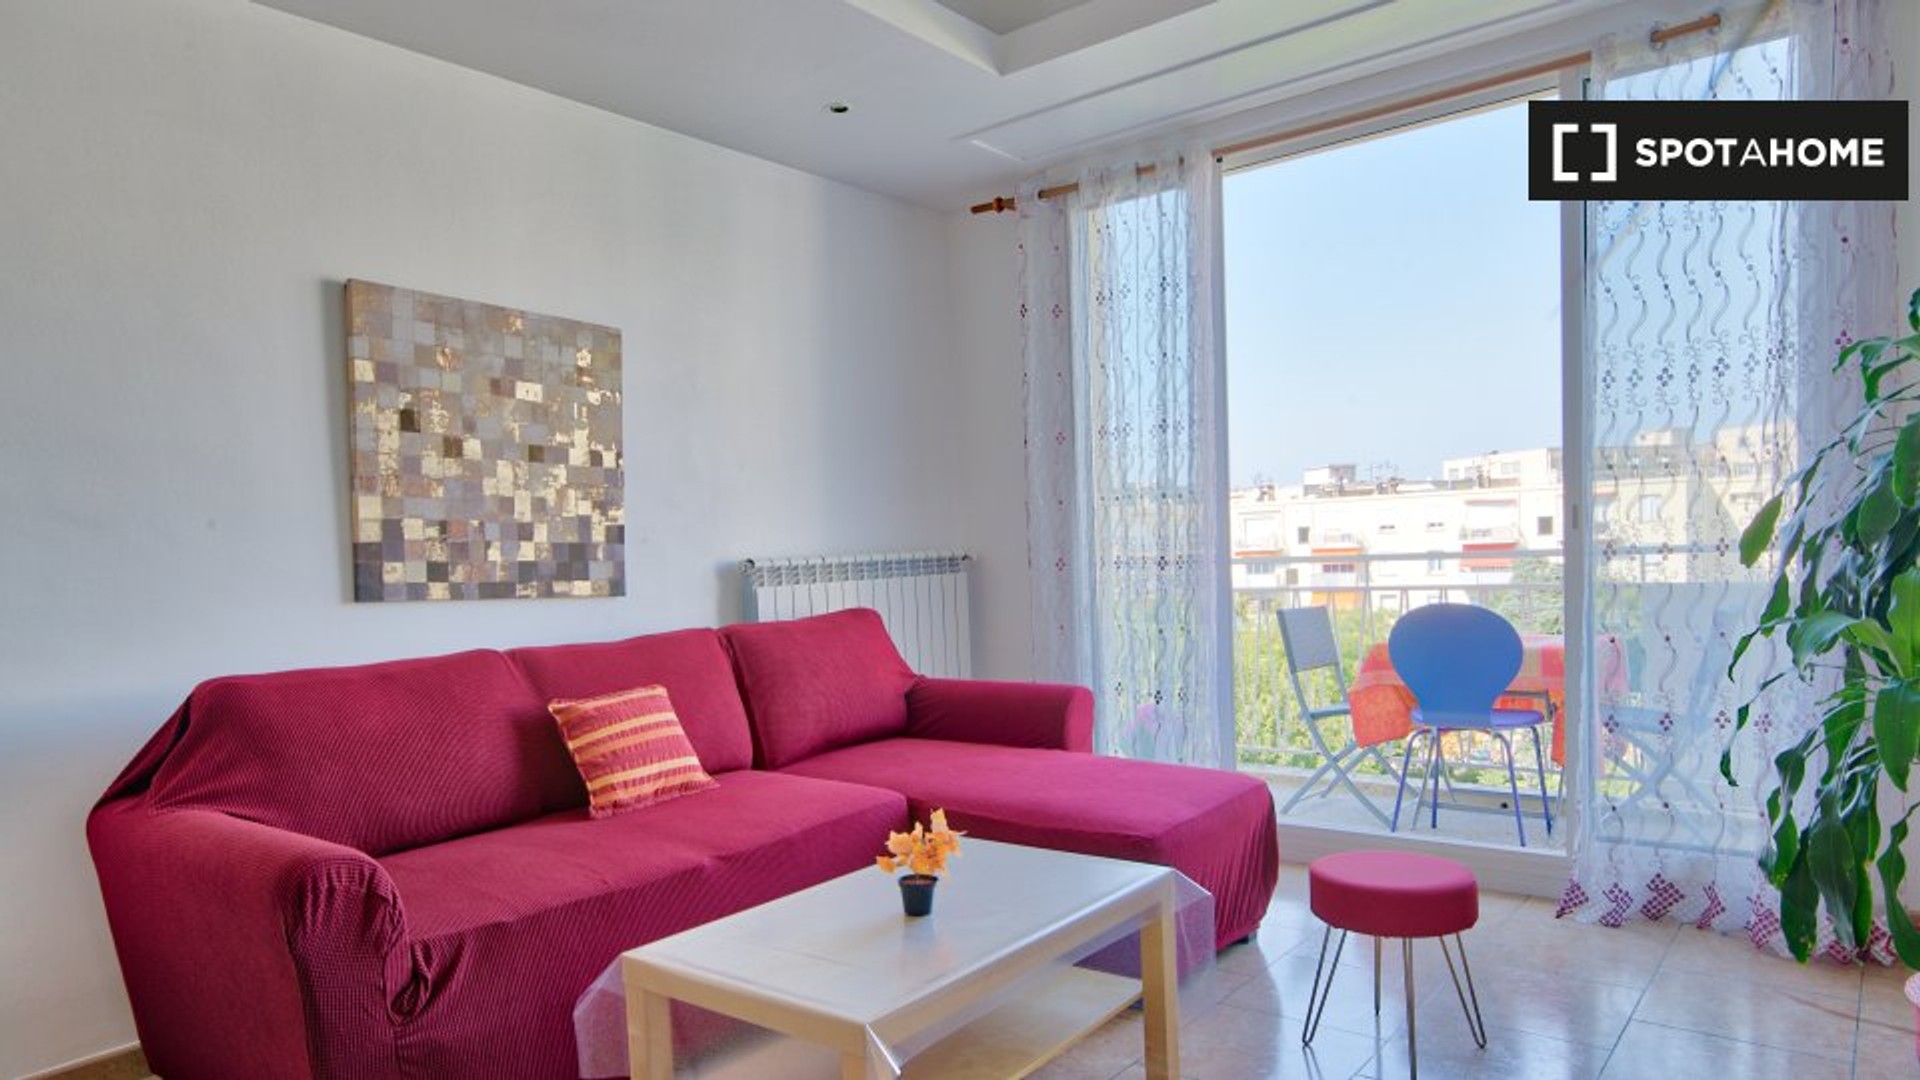 Accommodation in the centre of Marseille